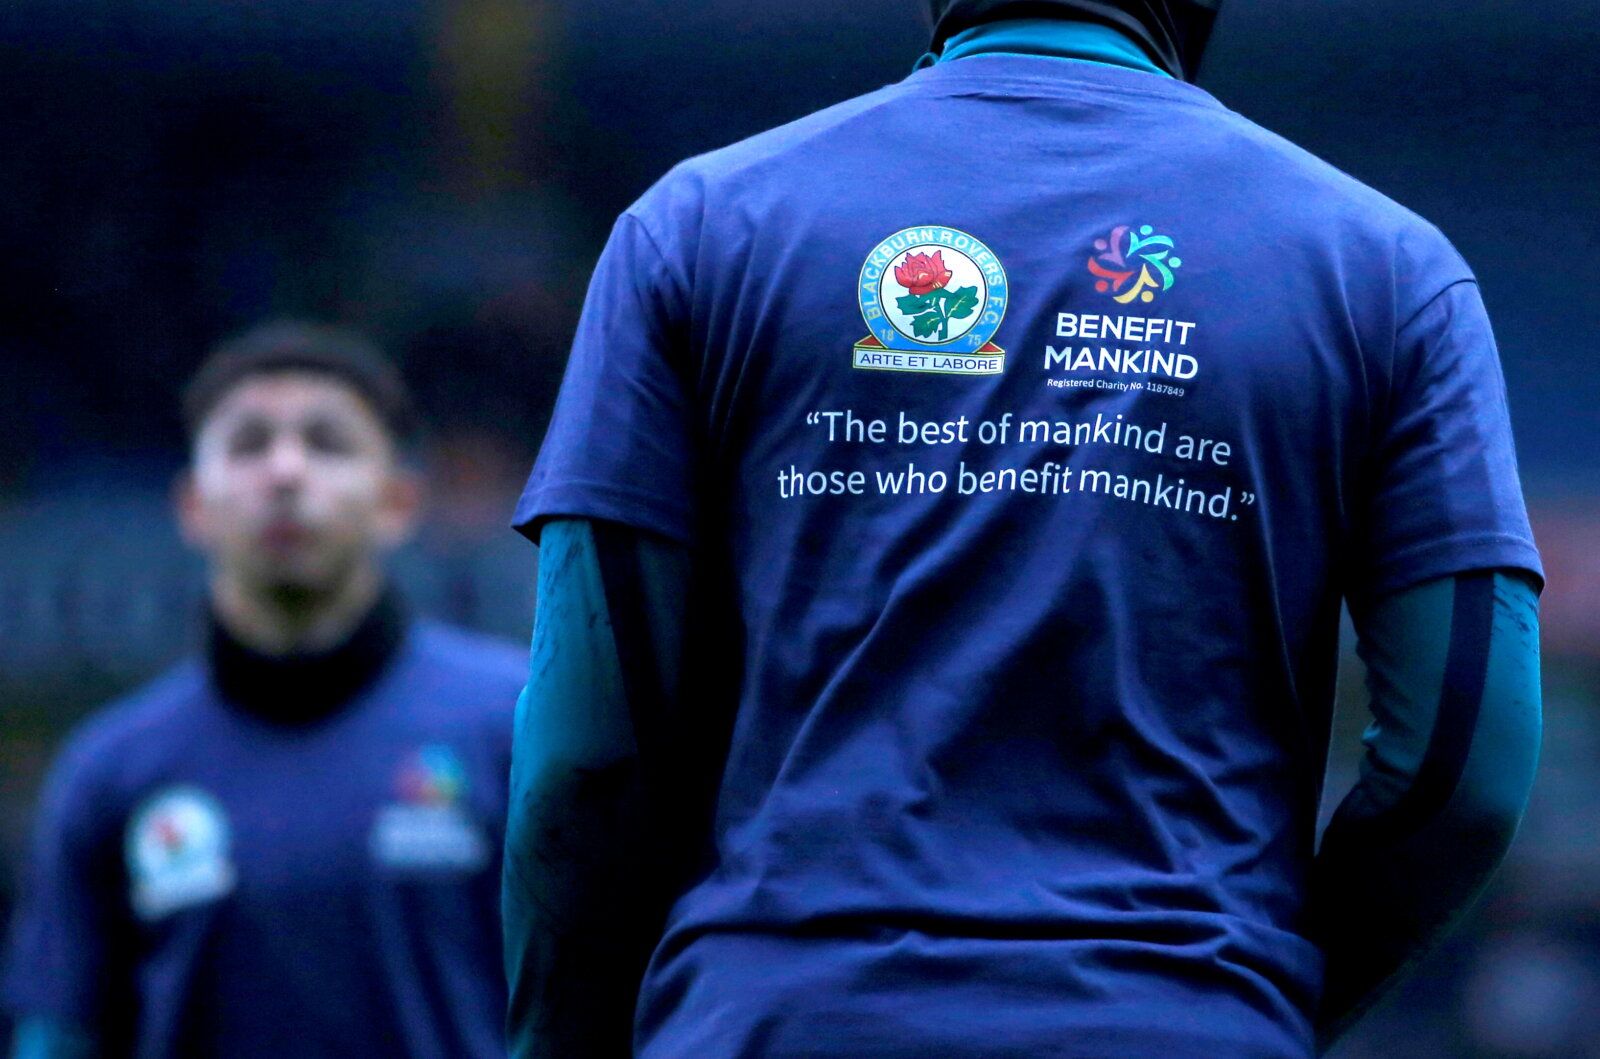 Soccer Football - Blackburn Rovers v Preston North End - Ewood Park, Blackburn, Britain - December 4, 2021  General view of a Blackburn Rovers' training top used during the warmup before the match  Action Images/Craig Brough  EDITORIAL USE ONLY. No use with unauthorized audio, video, data, fixture lists, club/league logos or 